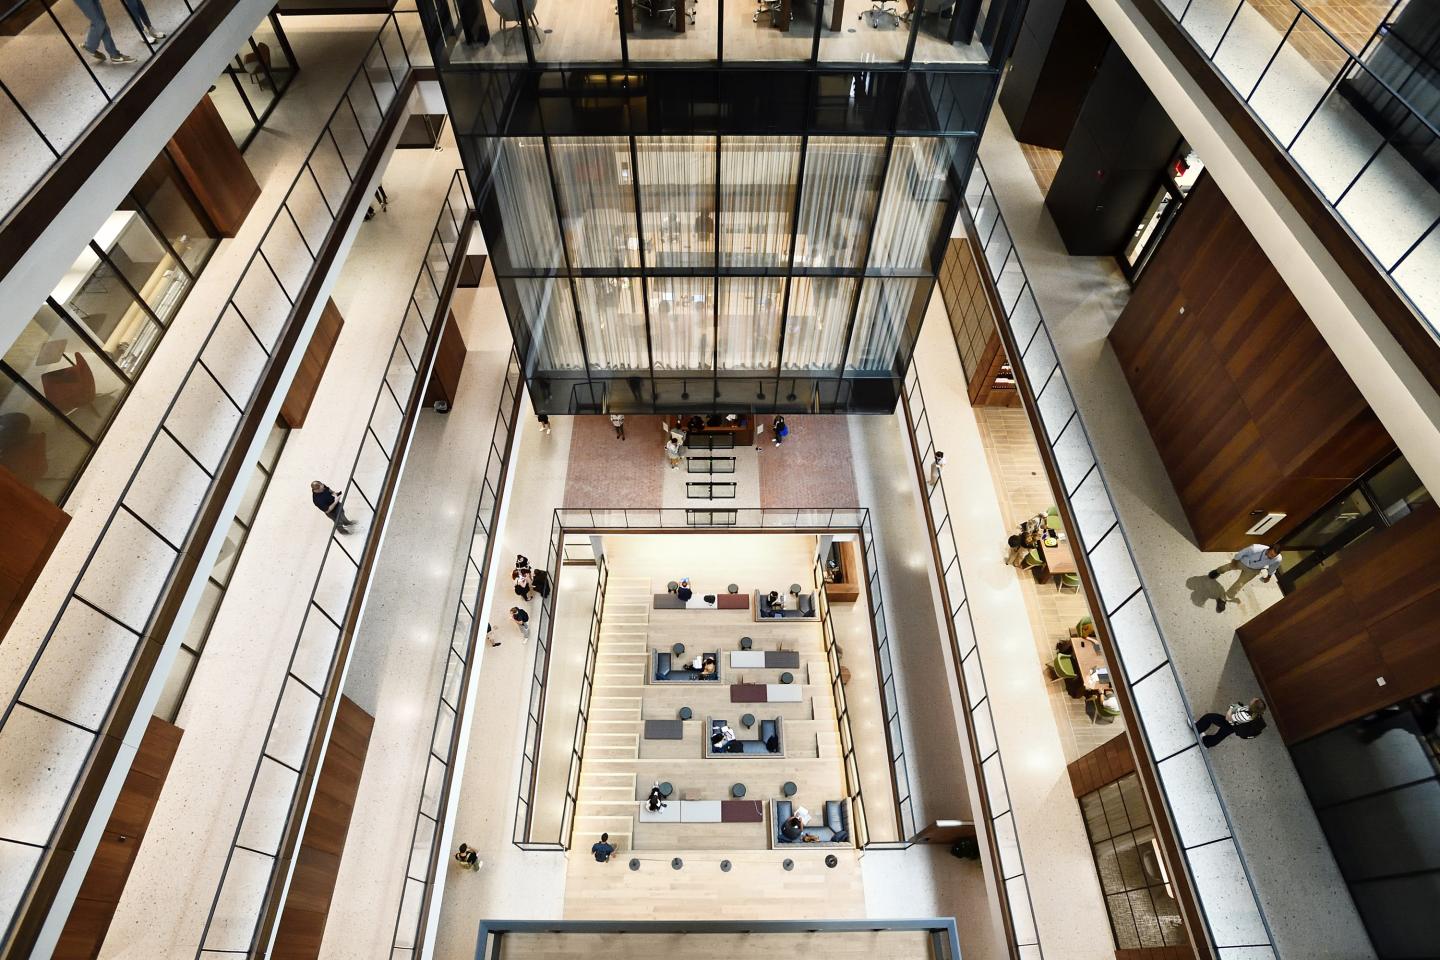 A view from above a large, multi-level atrium